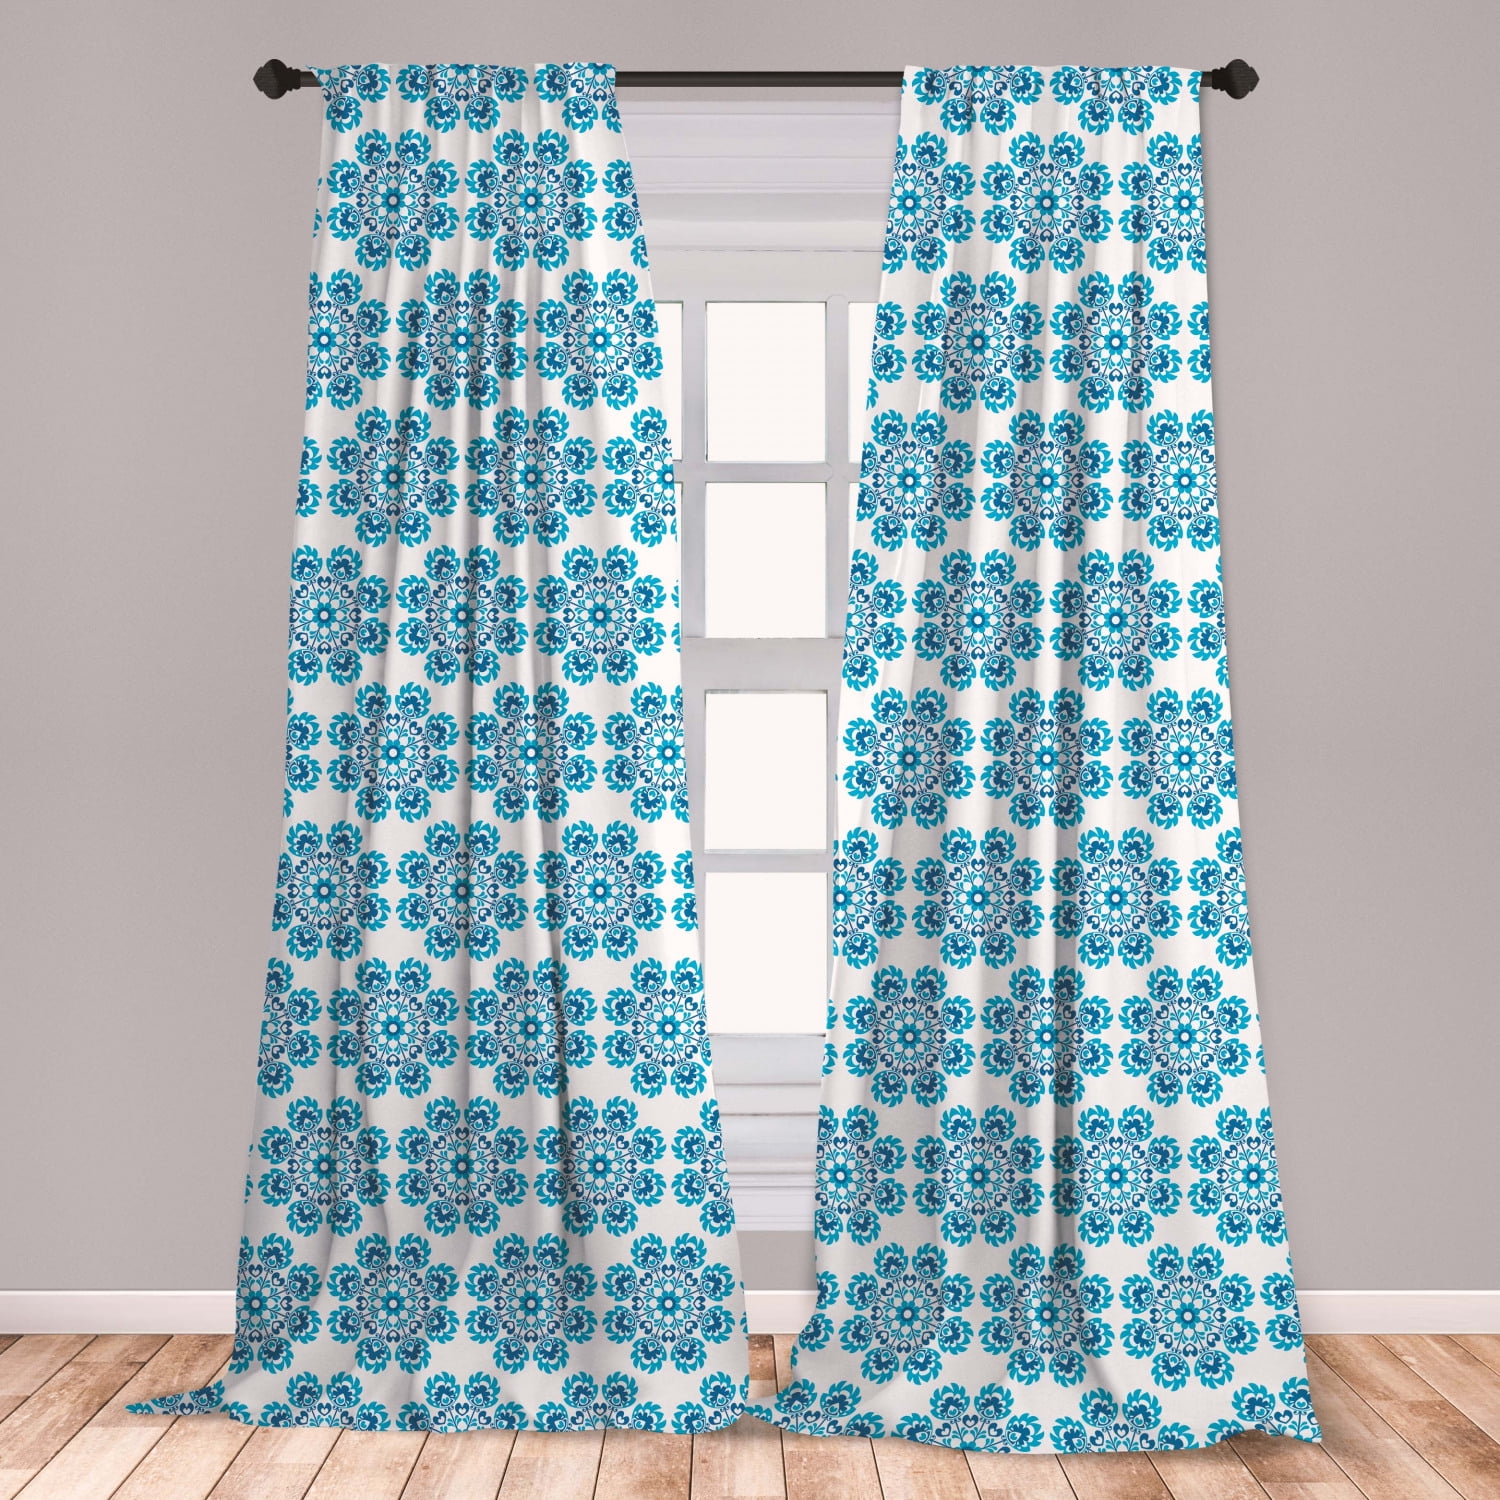 Ethnic Curtains 2 Panels Set Polish Folklore Inspirations In Floral